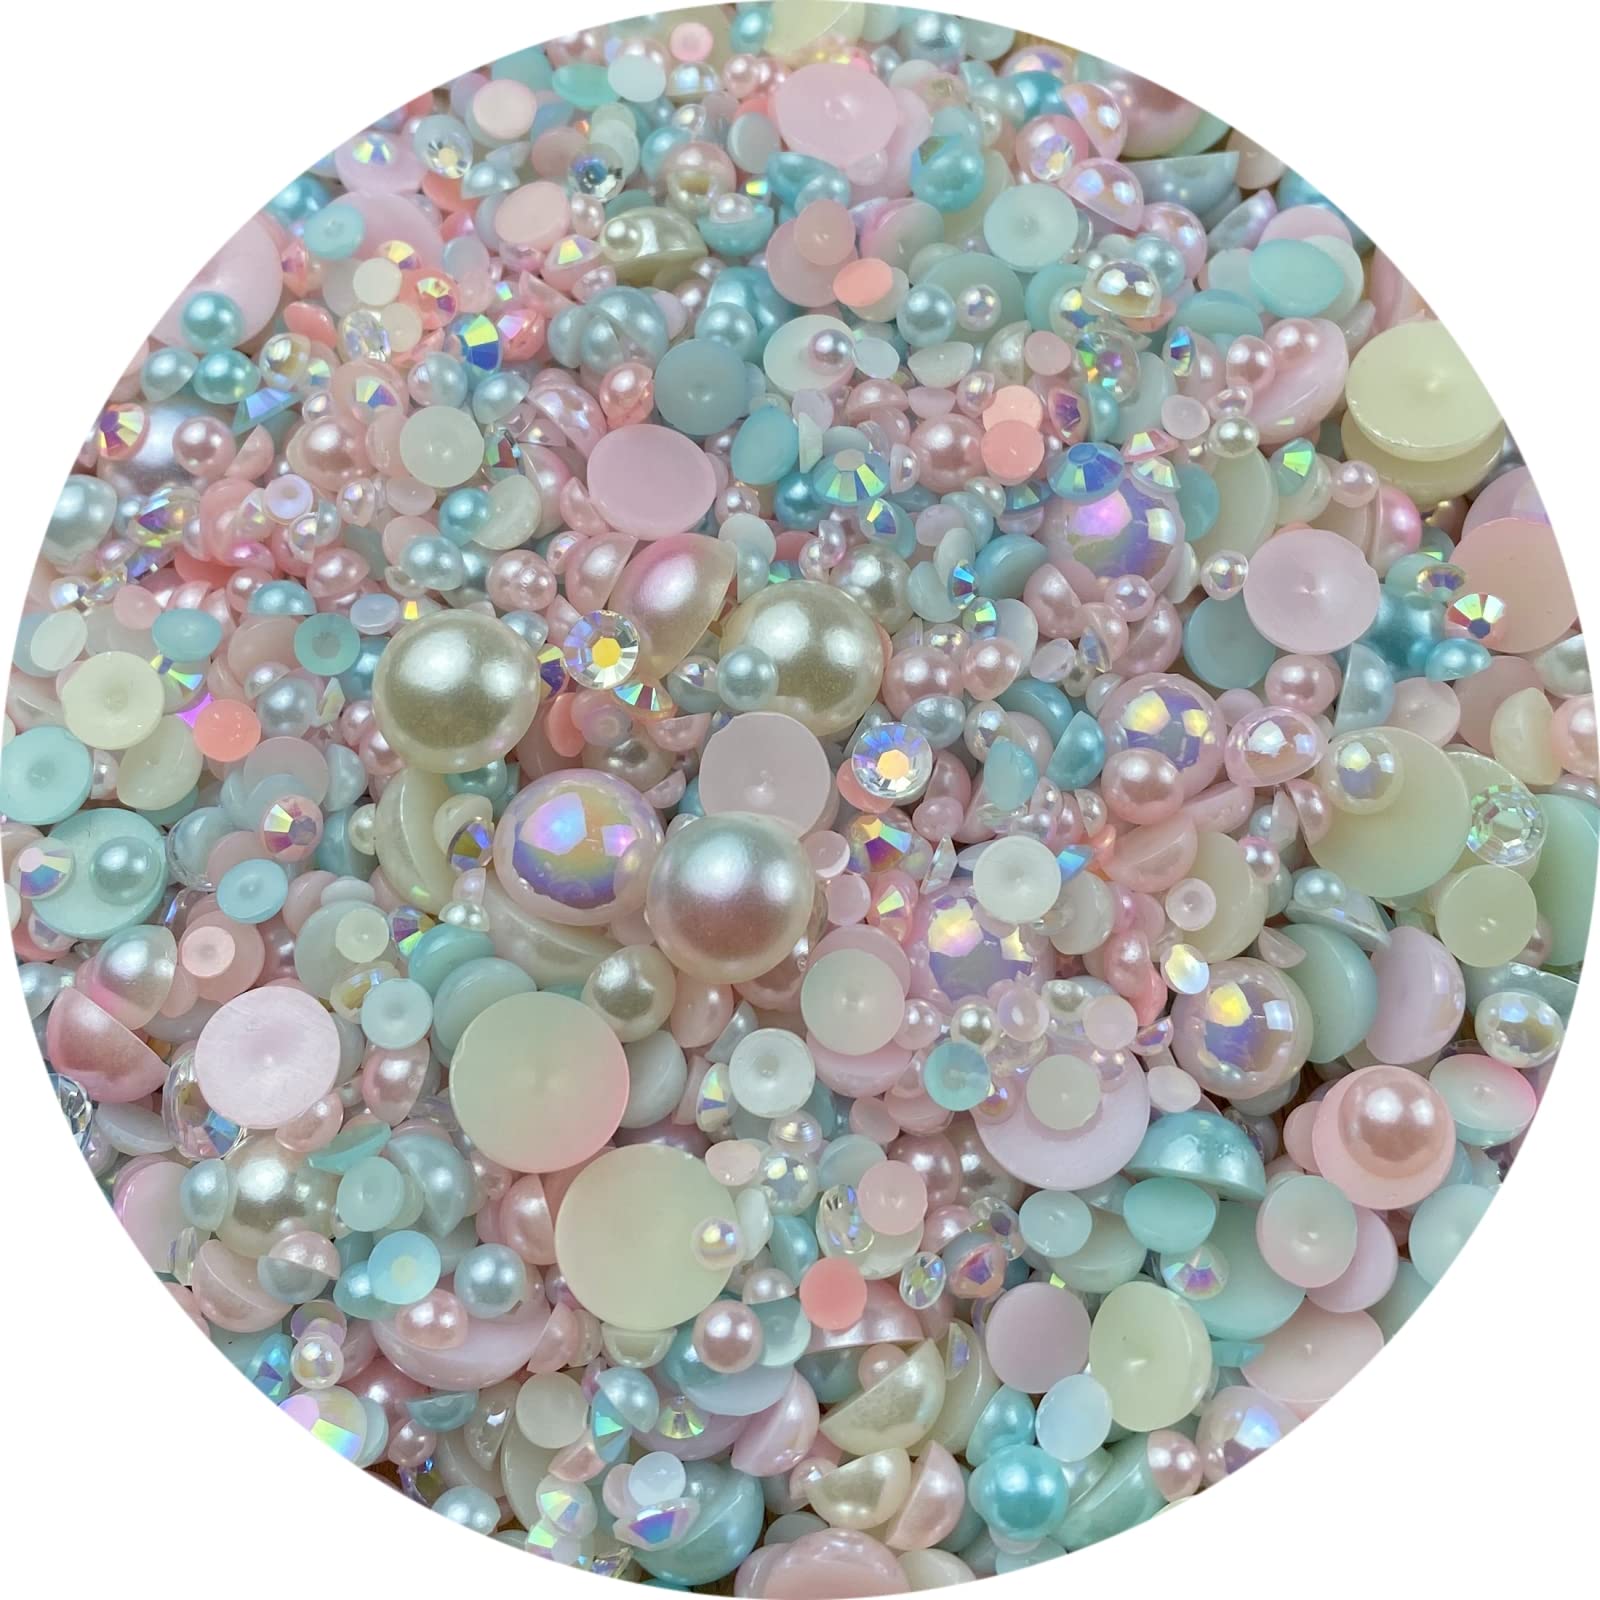  Briskbloom 60g Mix Pearls and Rhinestones, 3620PCS 2mm-10mm  Flatback Pearl Rhinestones for Crafts Nails Face Art Tumblers, Jelly  Rhinestones and Half Pearls, with Tweezers Wax Pen, Pink, Brown